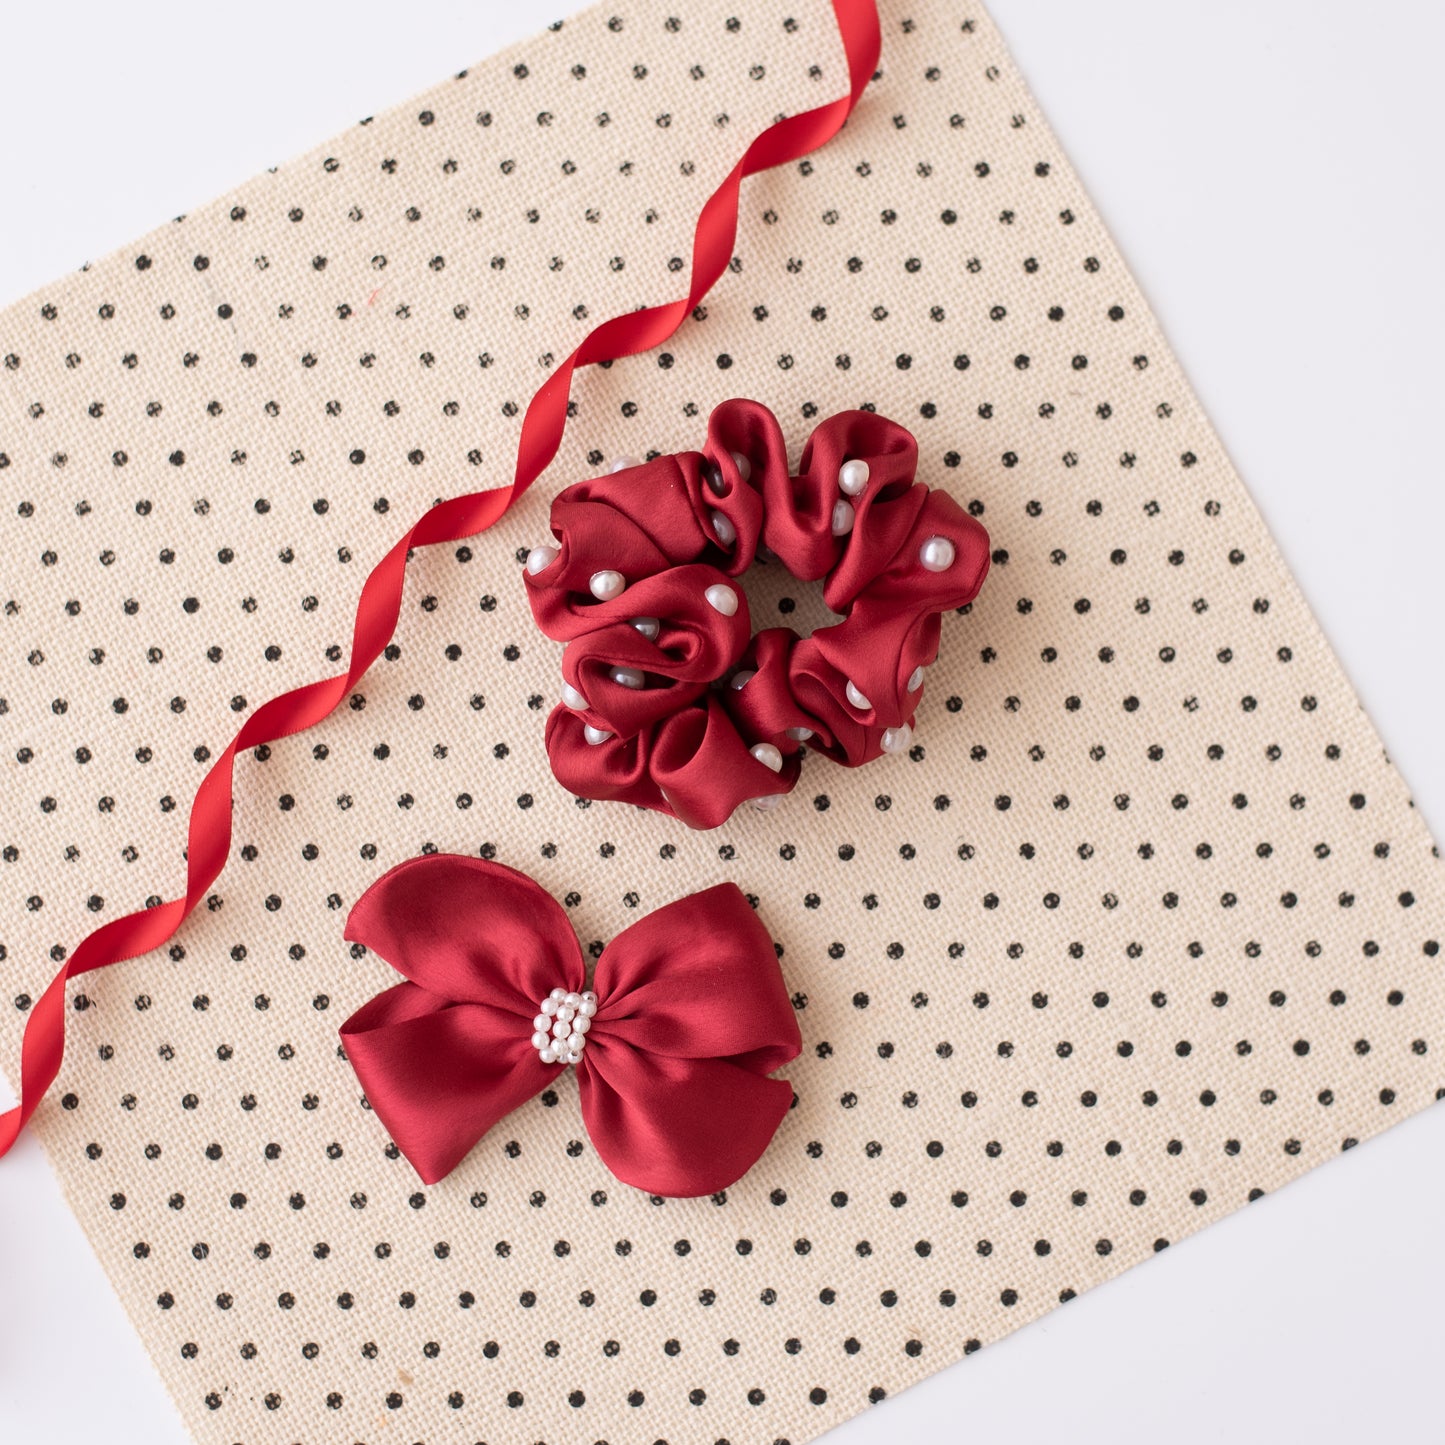 Christmas Combo: Set of 1 bow on alligator pin and one satin scrunchie. Both embellished with pearls - Maroon